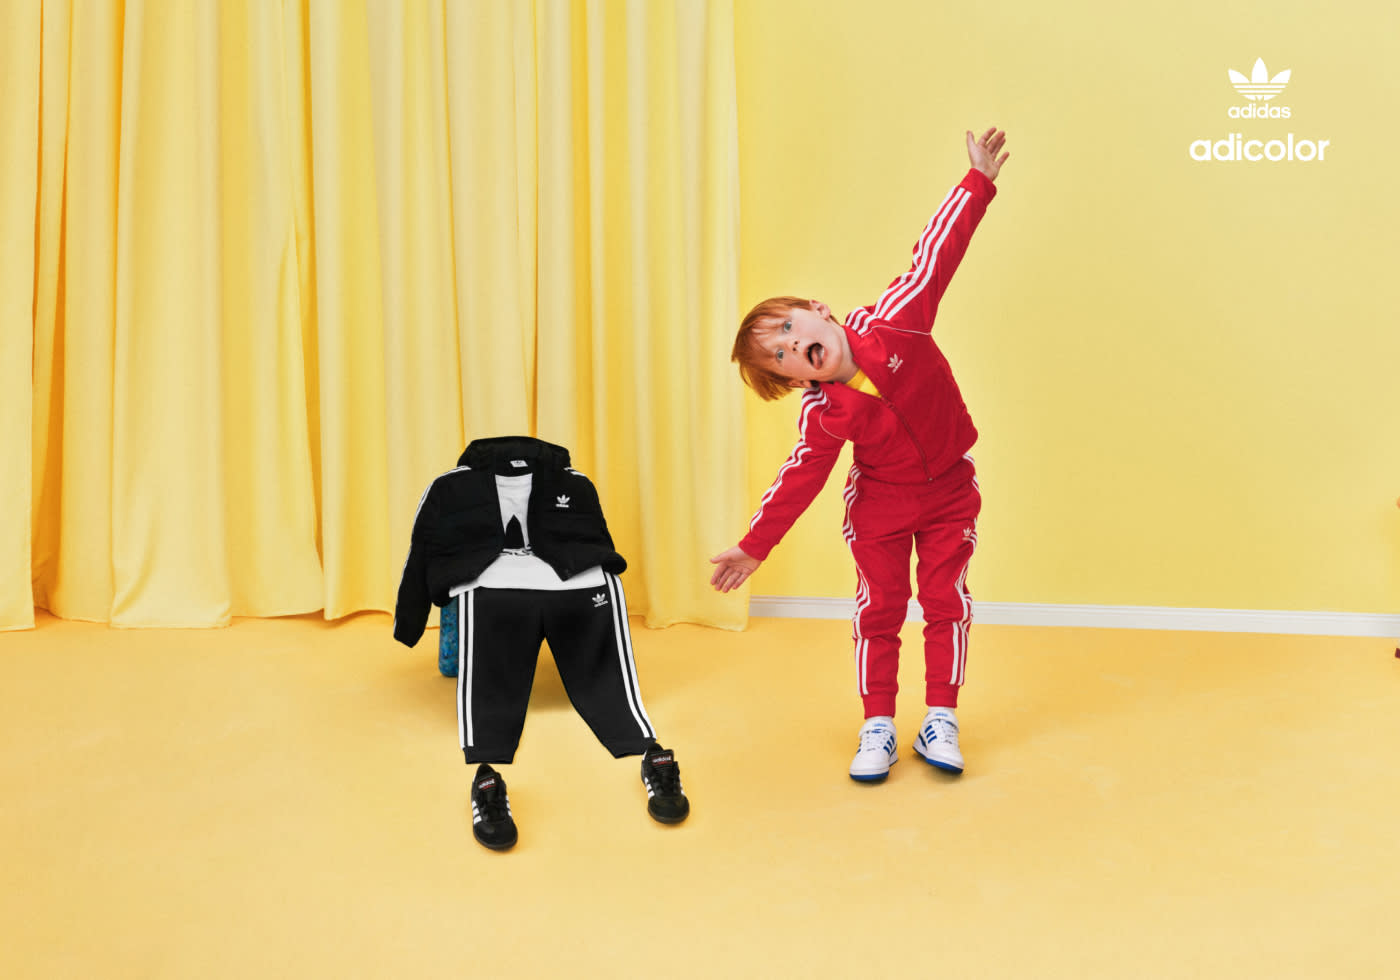 A kid in a yellow room wearing a red adicolor tracksuit, standing next to a chair with a green and black adicolor tracksuit draped over it